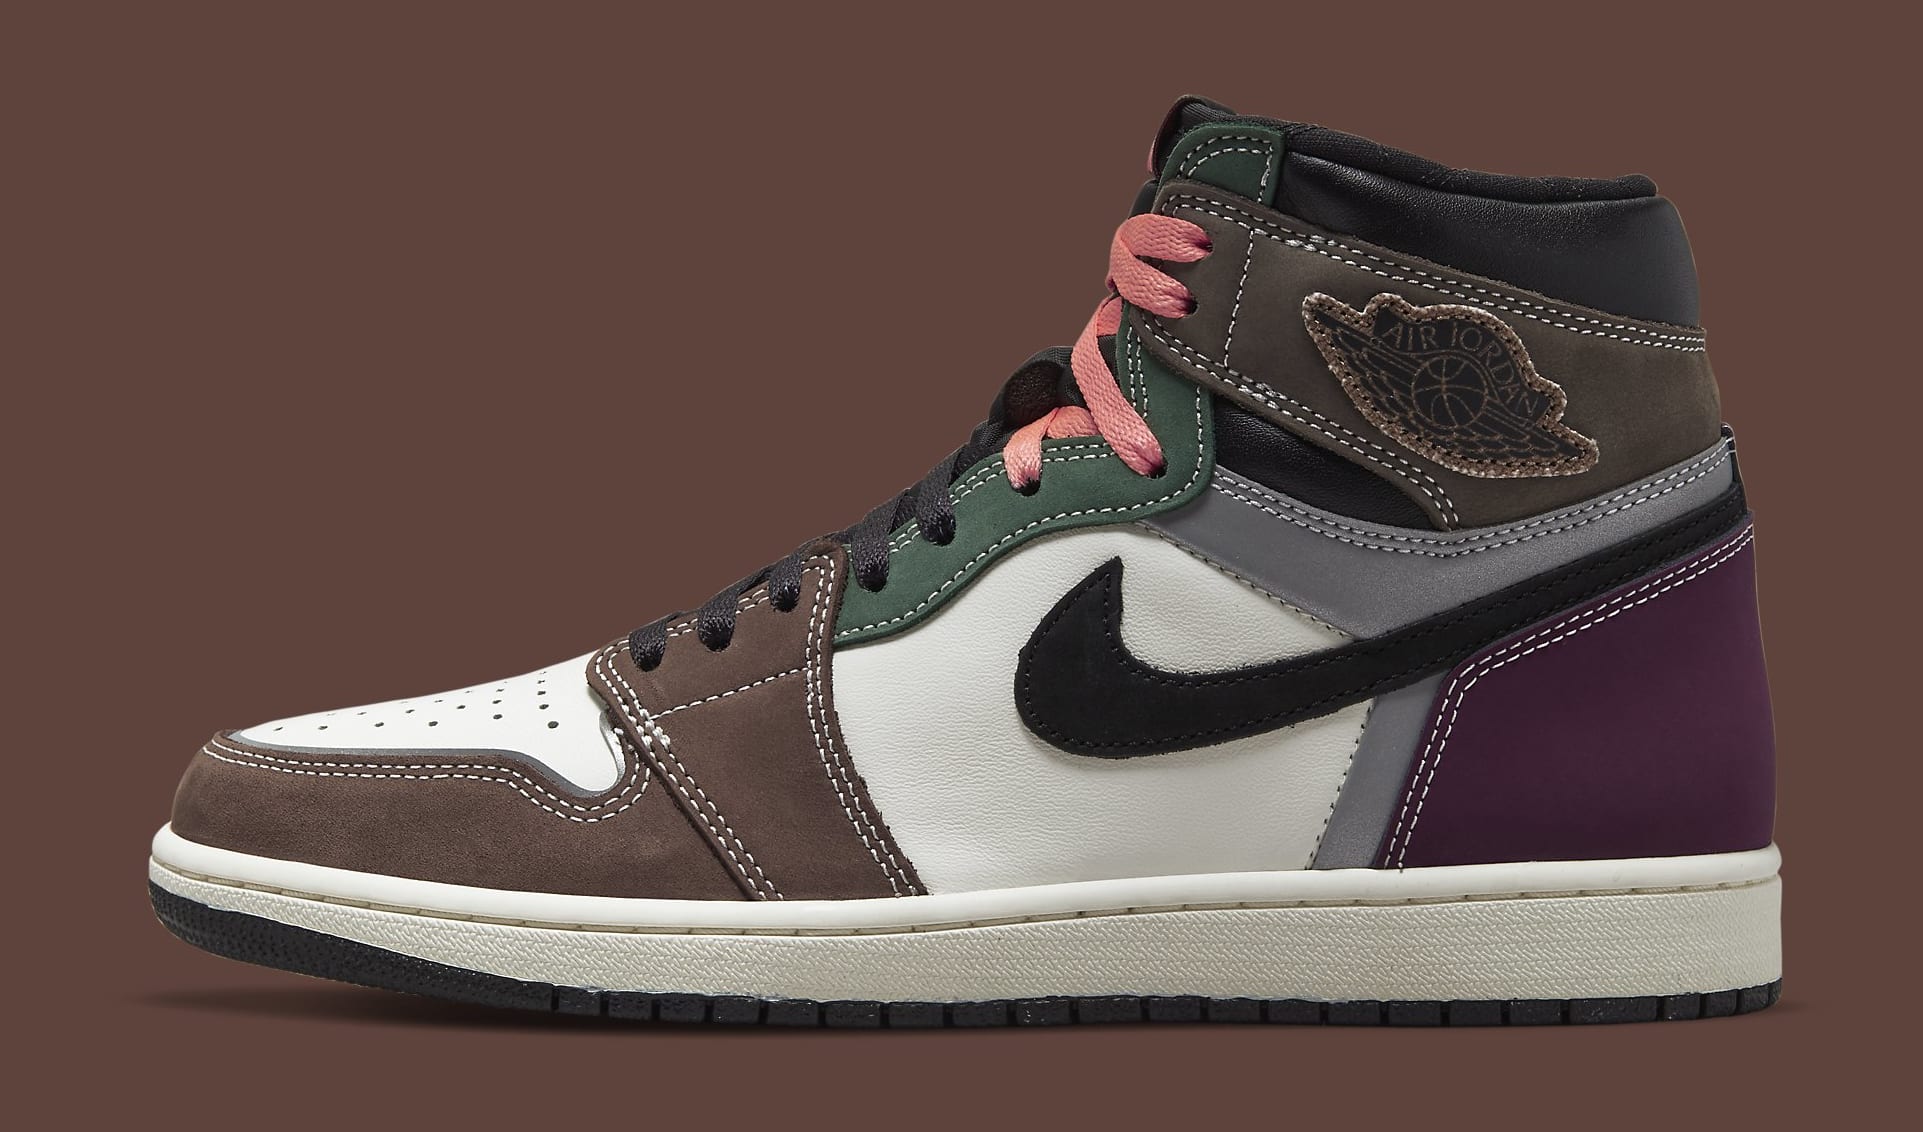 Air Jordan 1 High 'Handcrafted' DH3097 001 Lateral